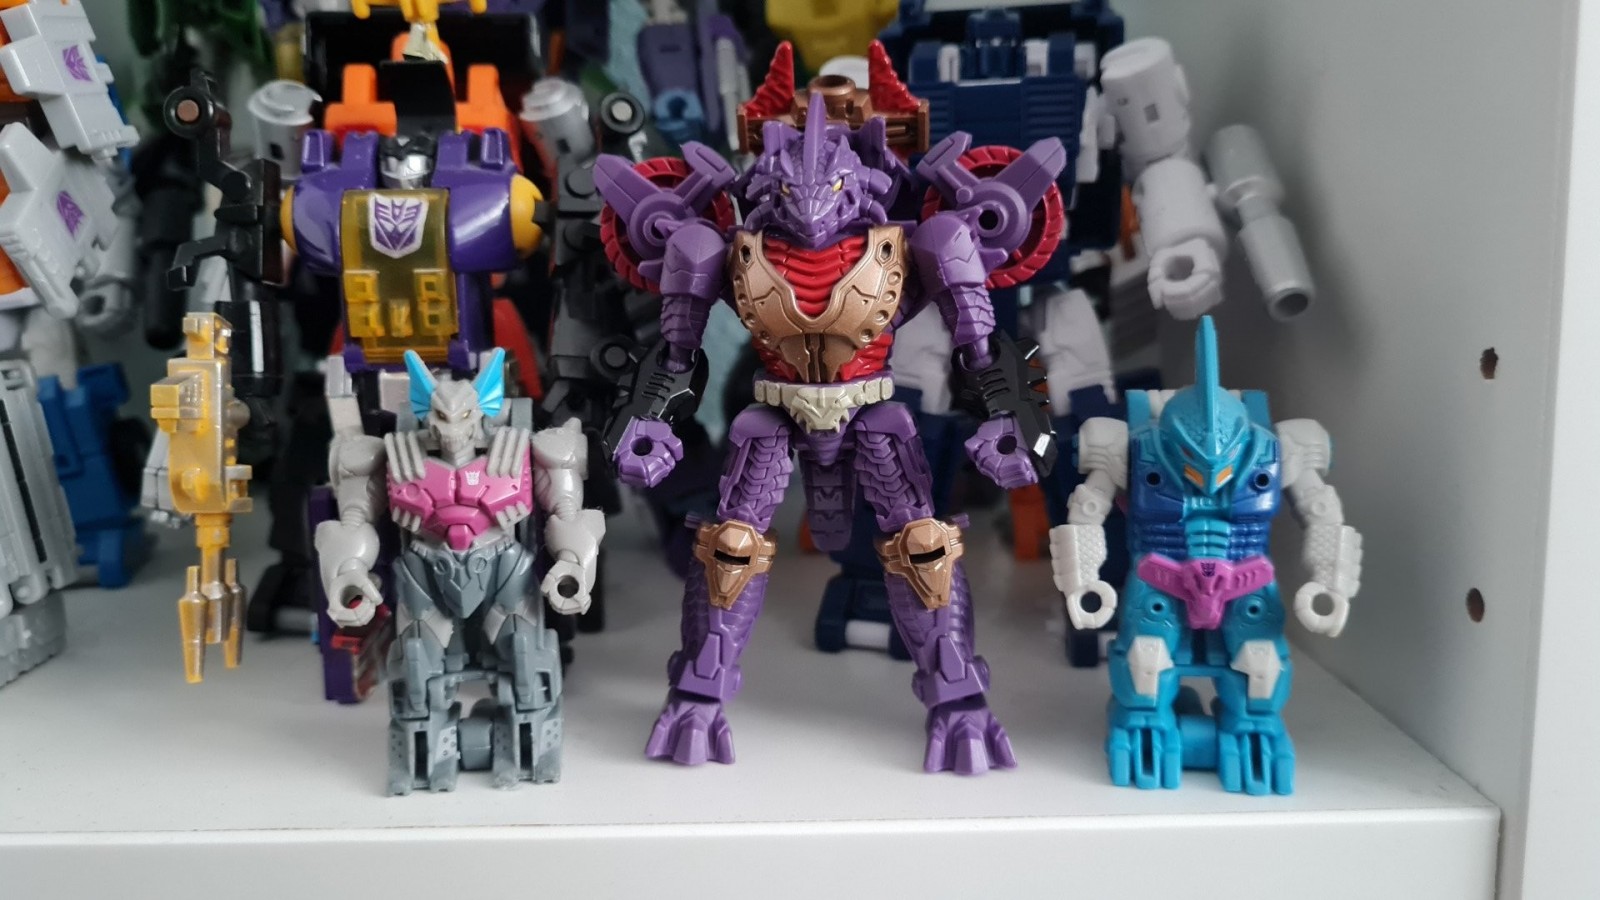 Transformers News: In Hand Images of Transformers Legacy Iguanus